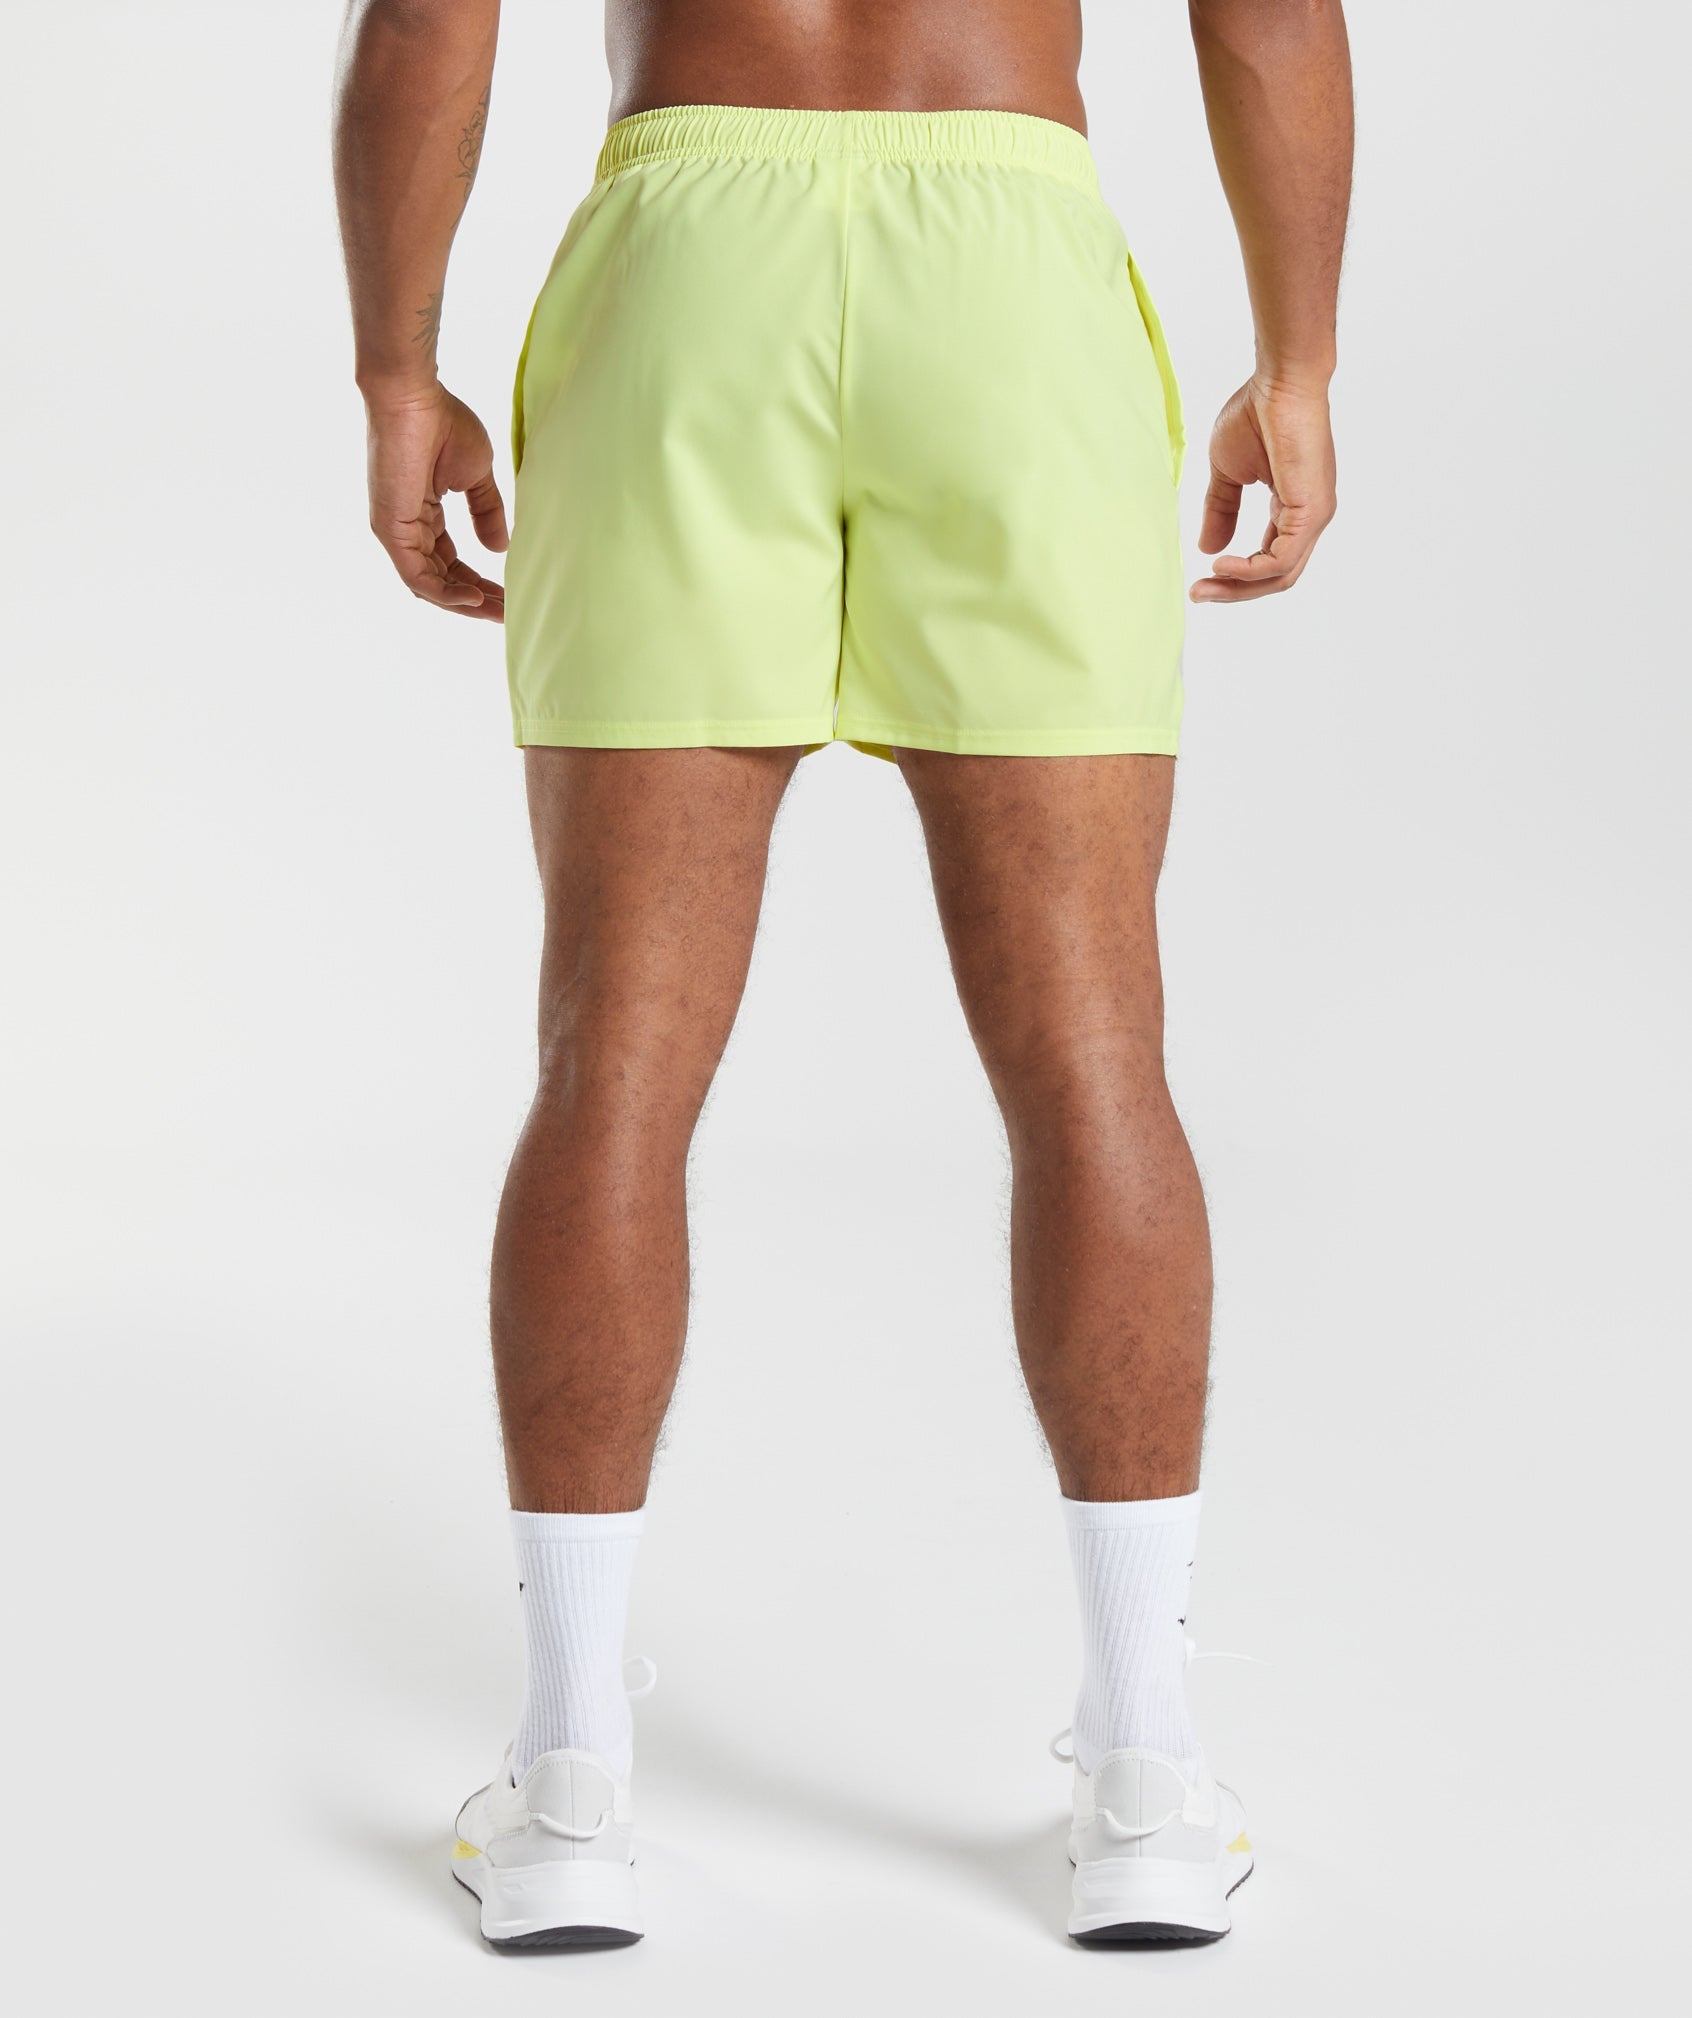 Arrival 5" Shorts in Firefly Green - view 2